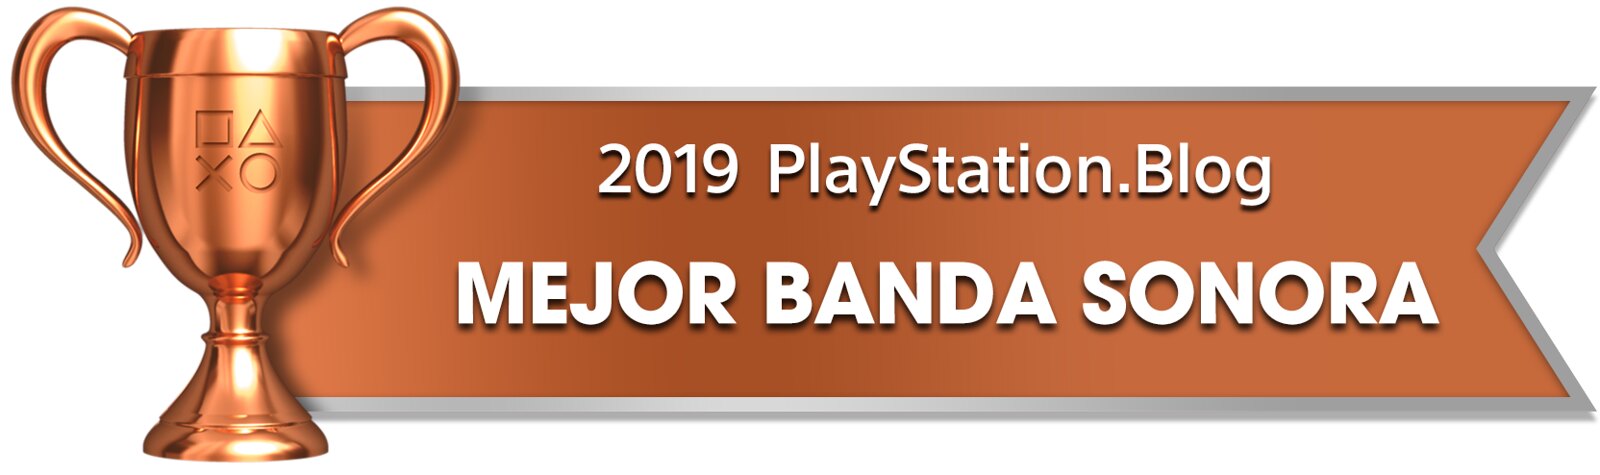 PS Blog Game of the Year 2019 - Best Soundtrack - 4 - Bronze